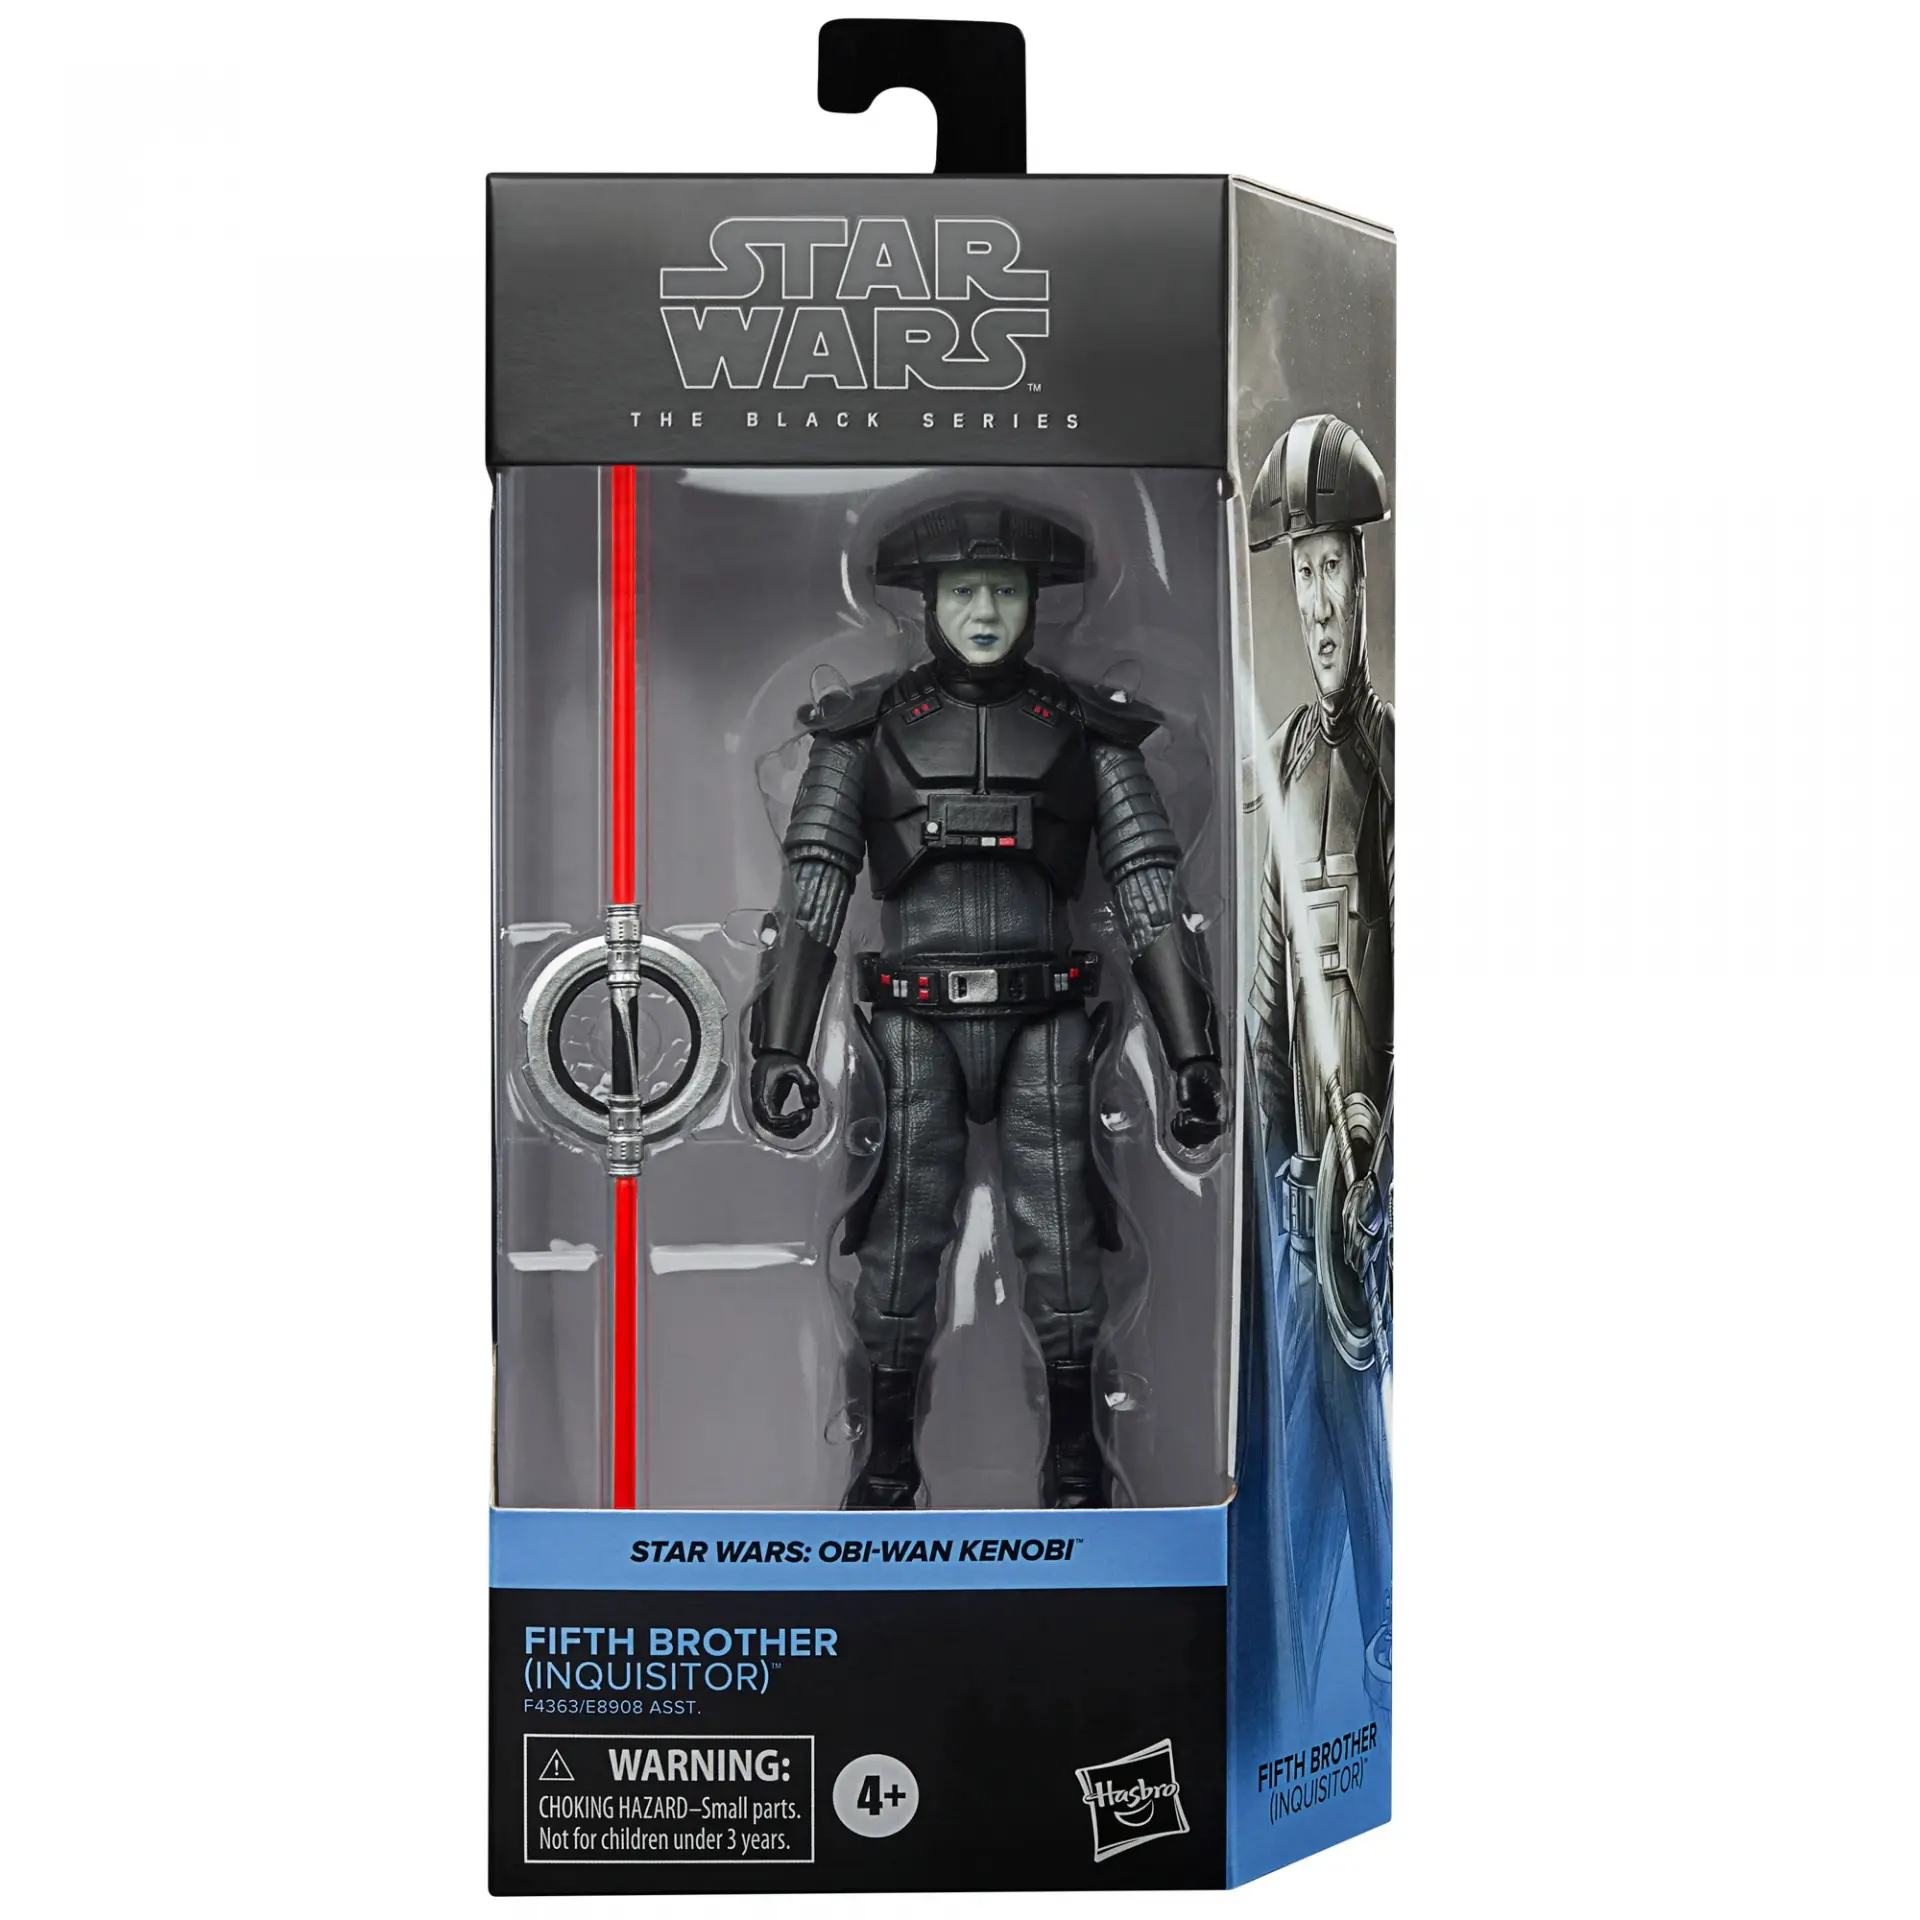 Star wars the black series fifth brother inquisitor jawascave 12